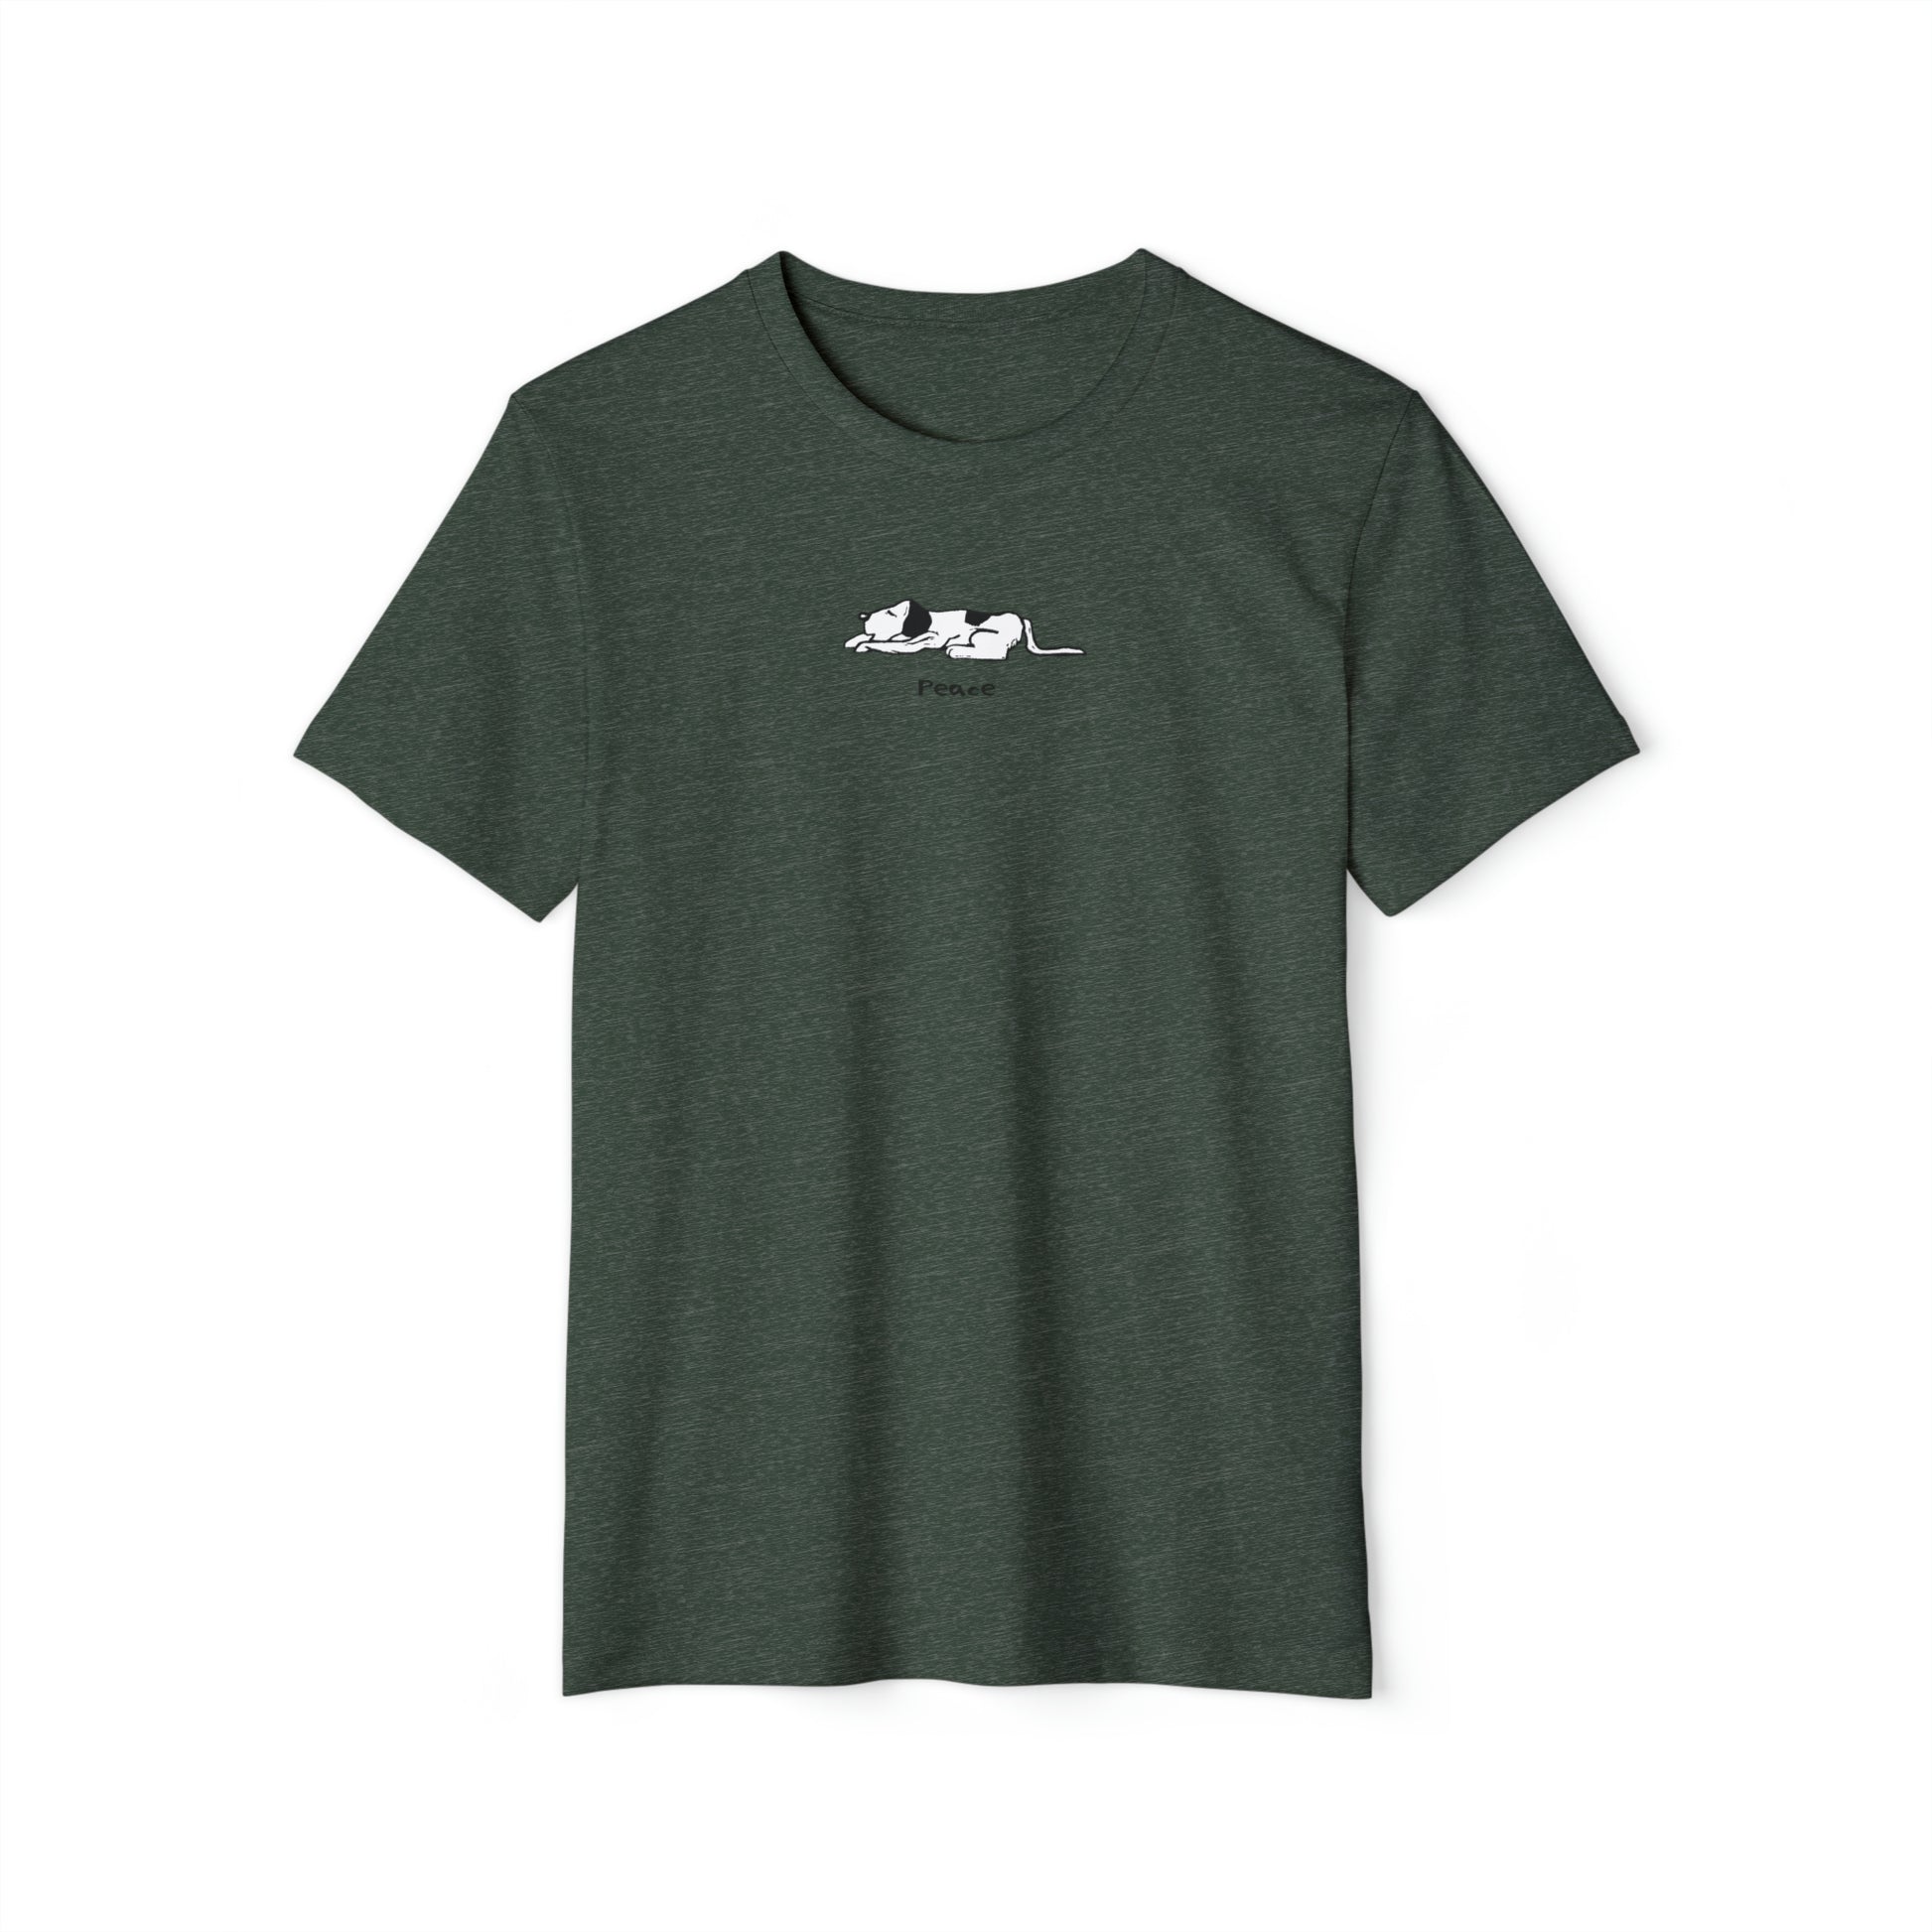 Black and white lying down sleeping dog on heather military green color unisex men's t-shirt. Text under image says Peace.